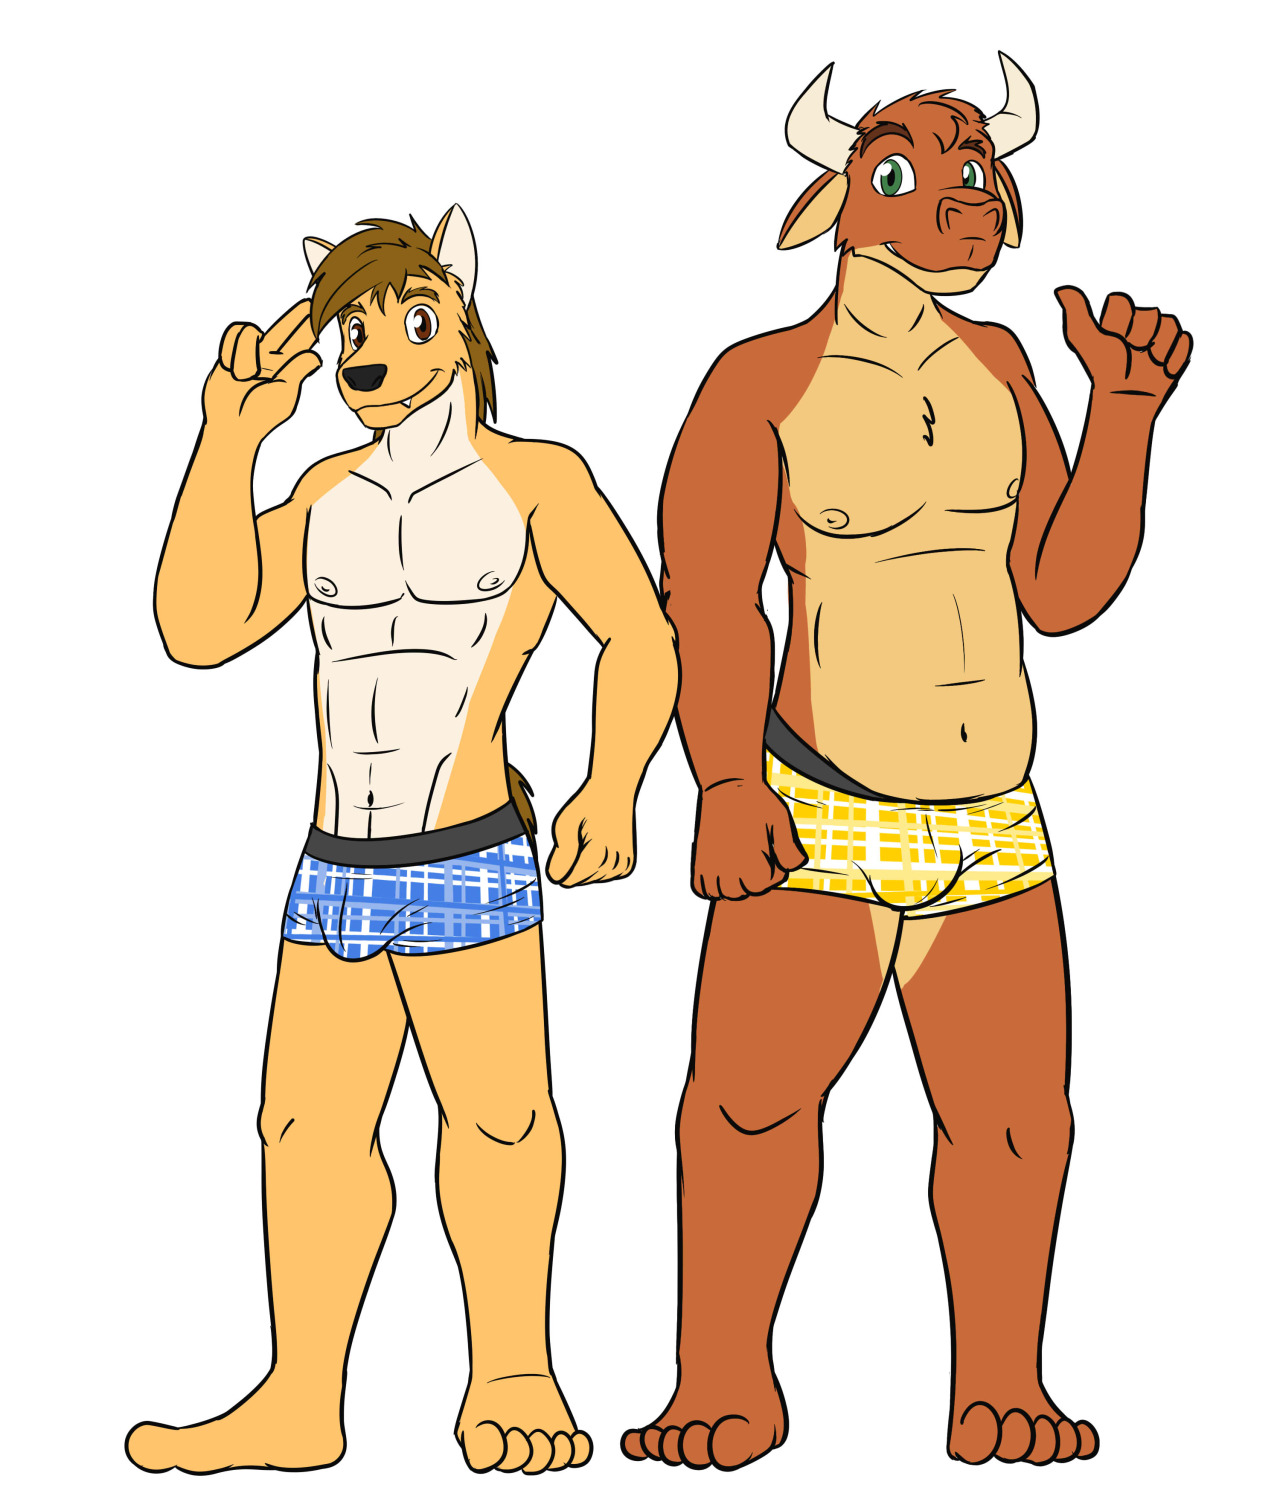 Mond and Ty in trunks - and the last two guys are done.  I think I could work on